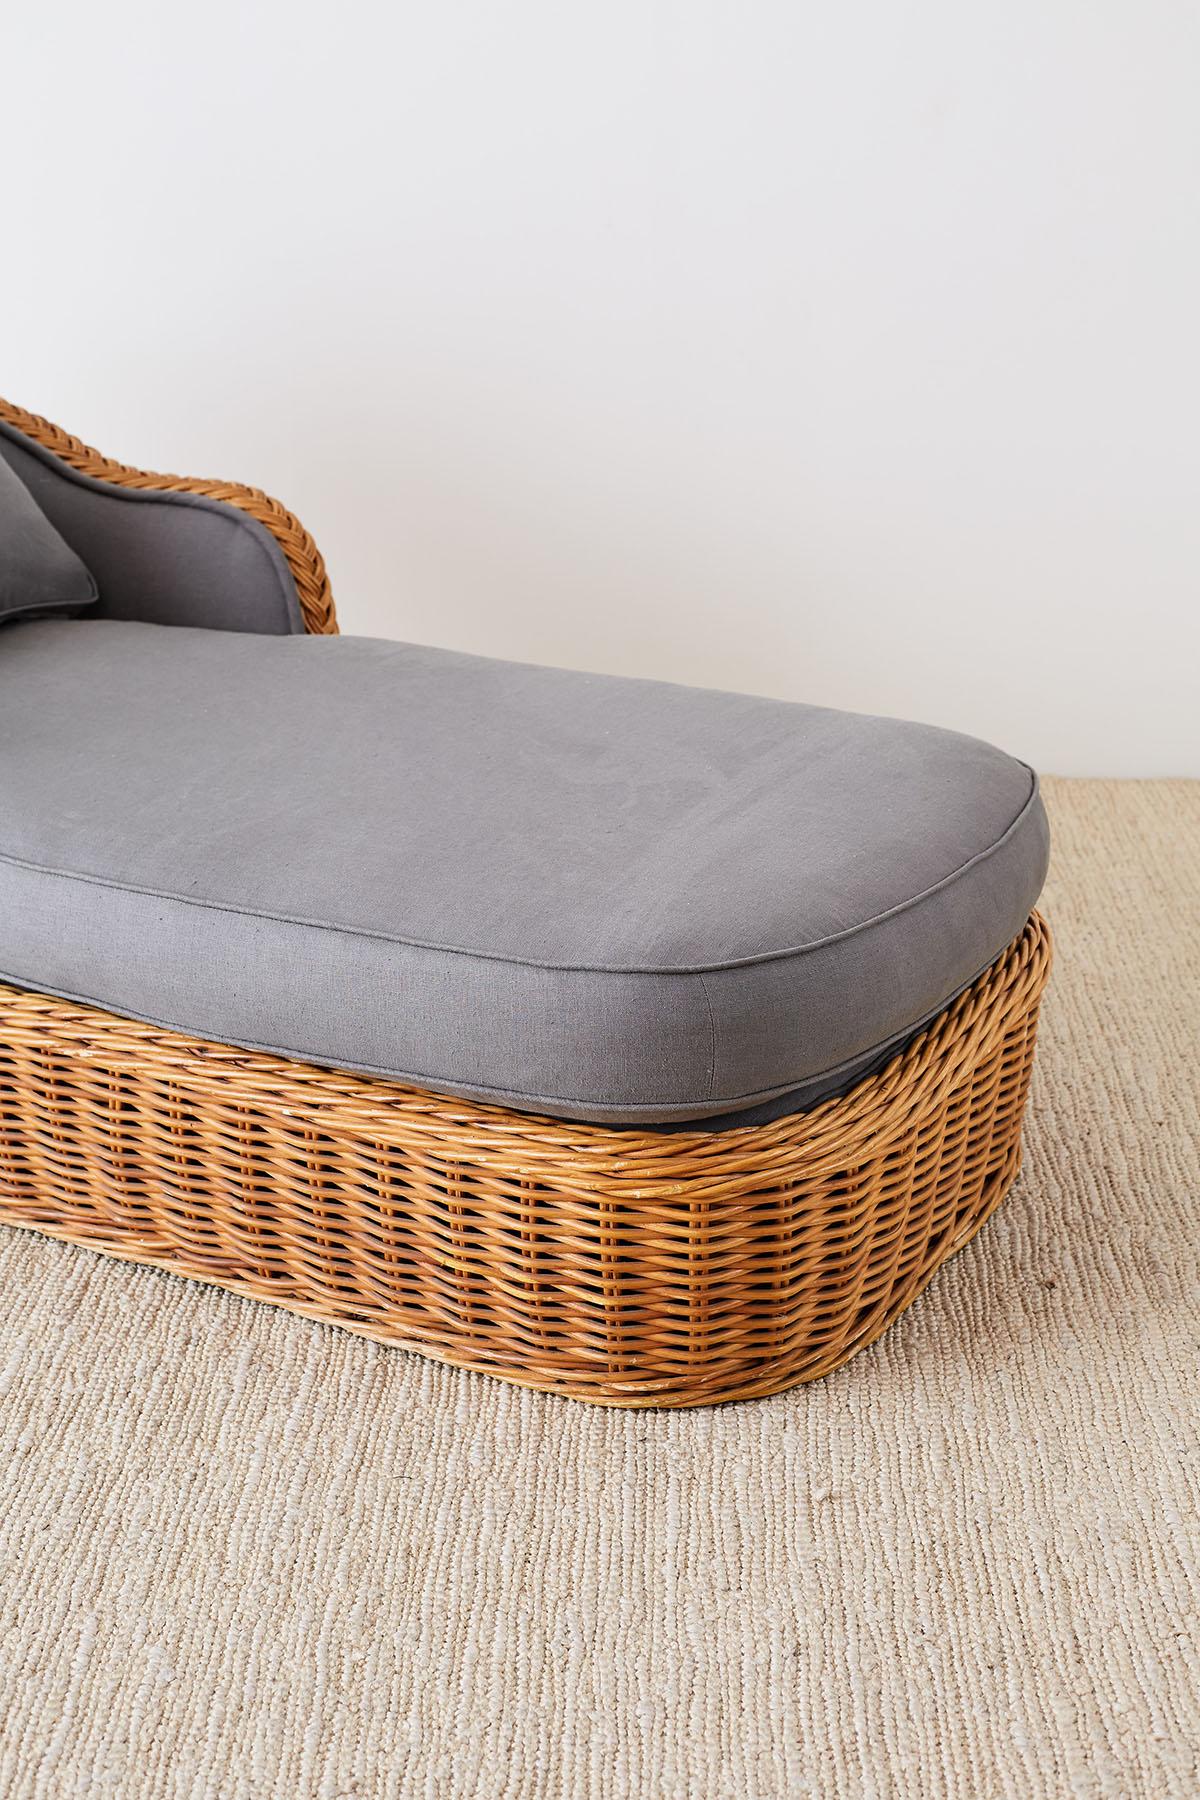 American Michael Taylor Style Wicker Chaise Lounge